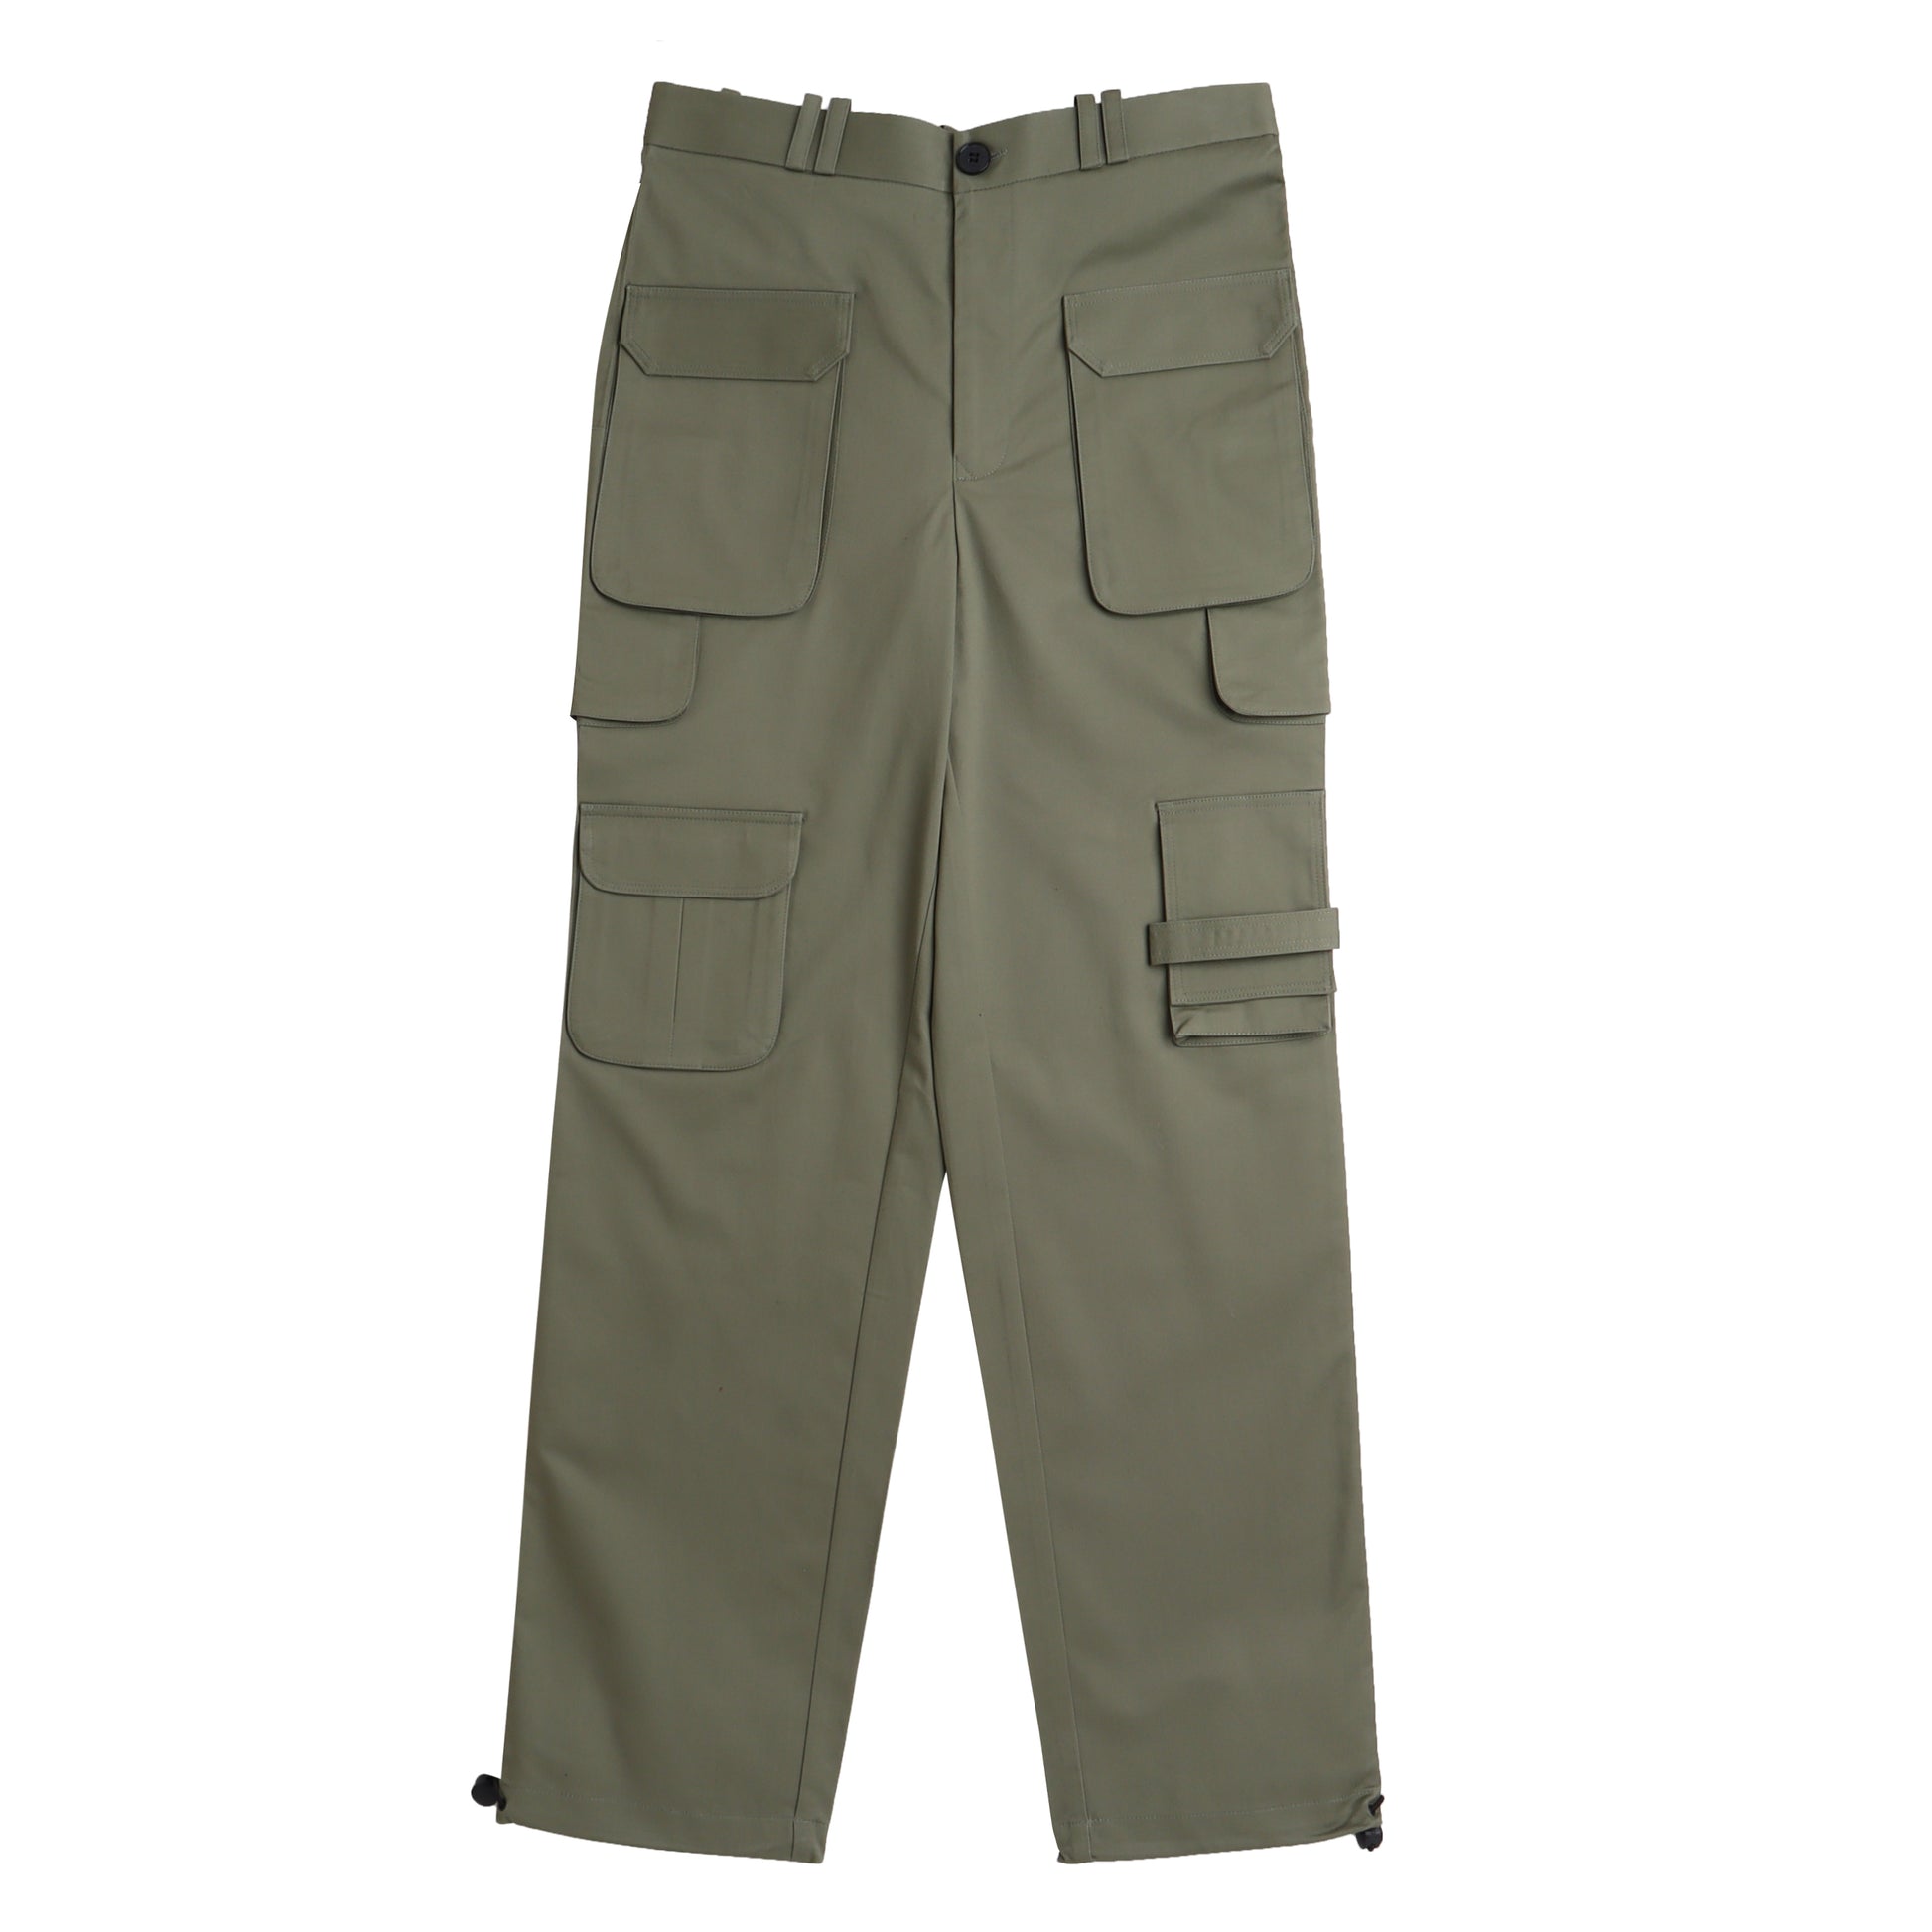 PANTS, FLLATLAY, POCKET DETAILS, ADJUSTABLE DRAWSTRINGS AT THE HEM, MENS PANTS, MENS CARGOS, CUSTOM CARGOS, WARPING THEORIES, WOMENS CARGOS, ONLINE FASHION, SPRING SUMMER FASHION, CASUAL WEAR, CASUAL CLOTHES, people also ask